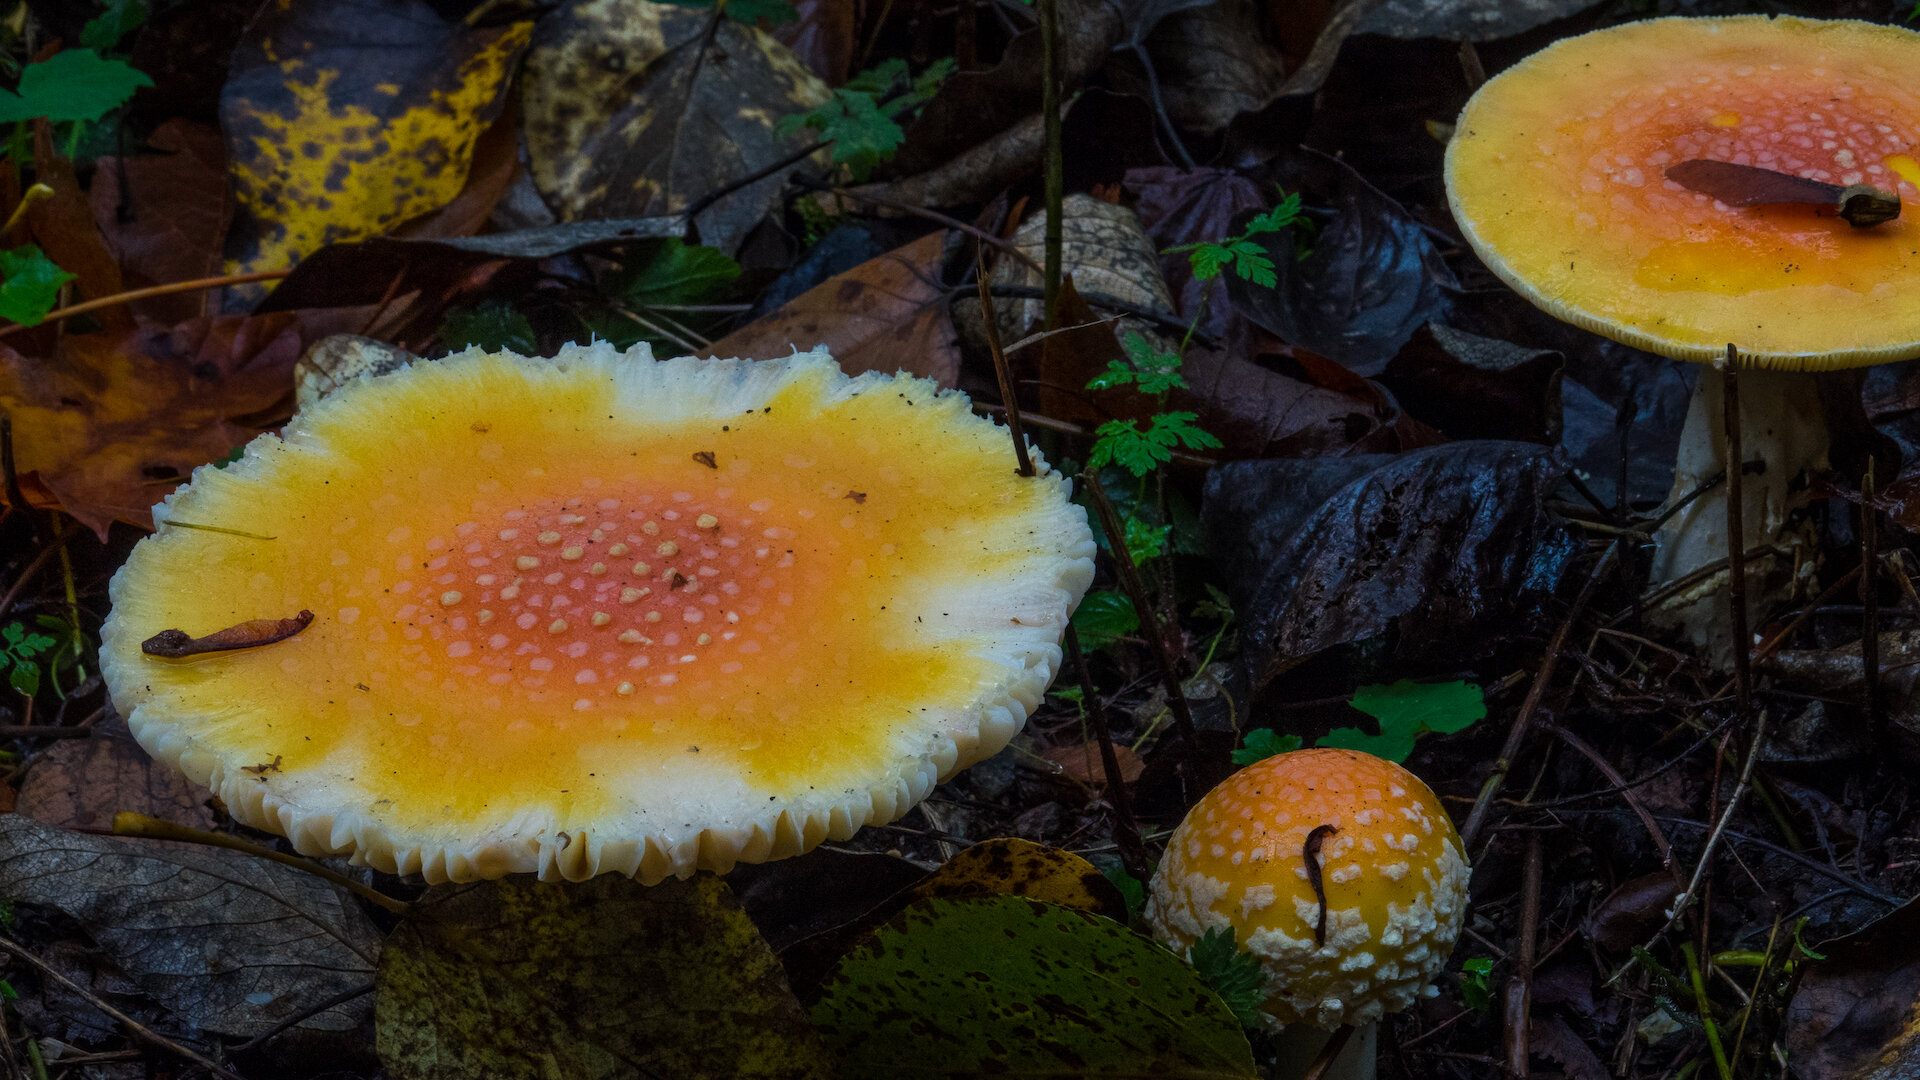  These were some of the most interesting and colorful mushrooms we saw on the hike. 